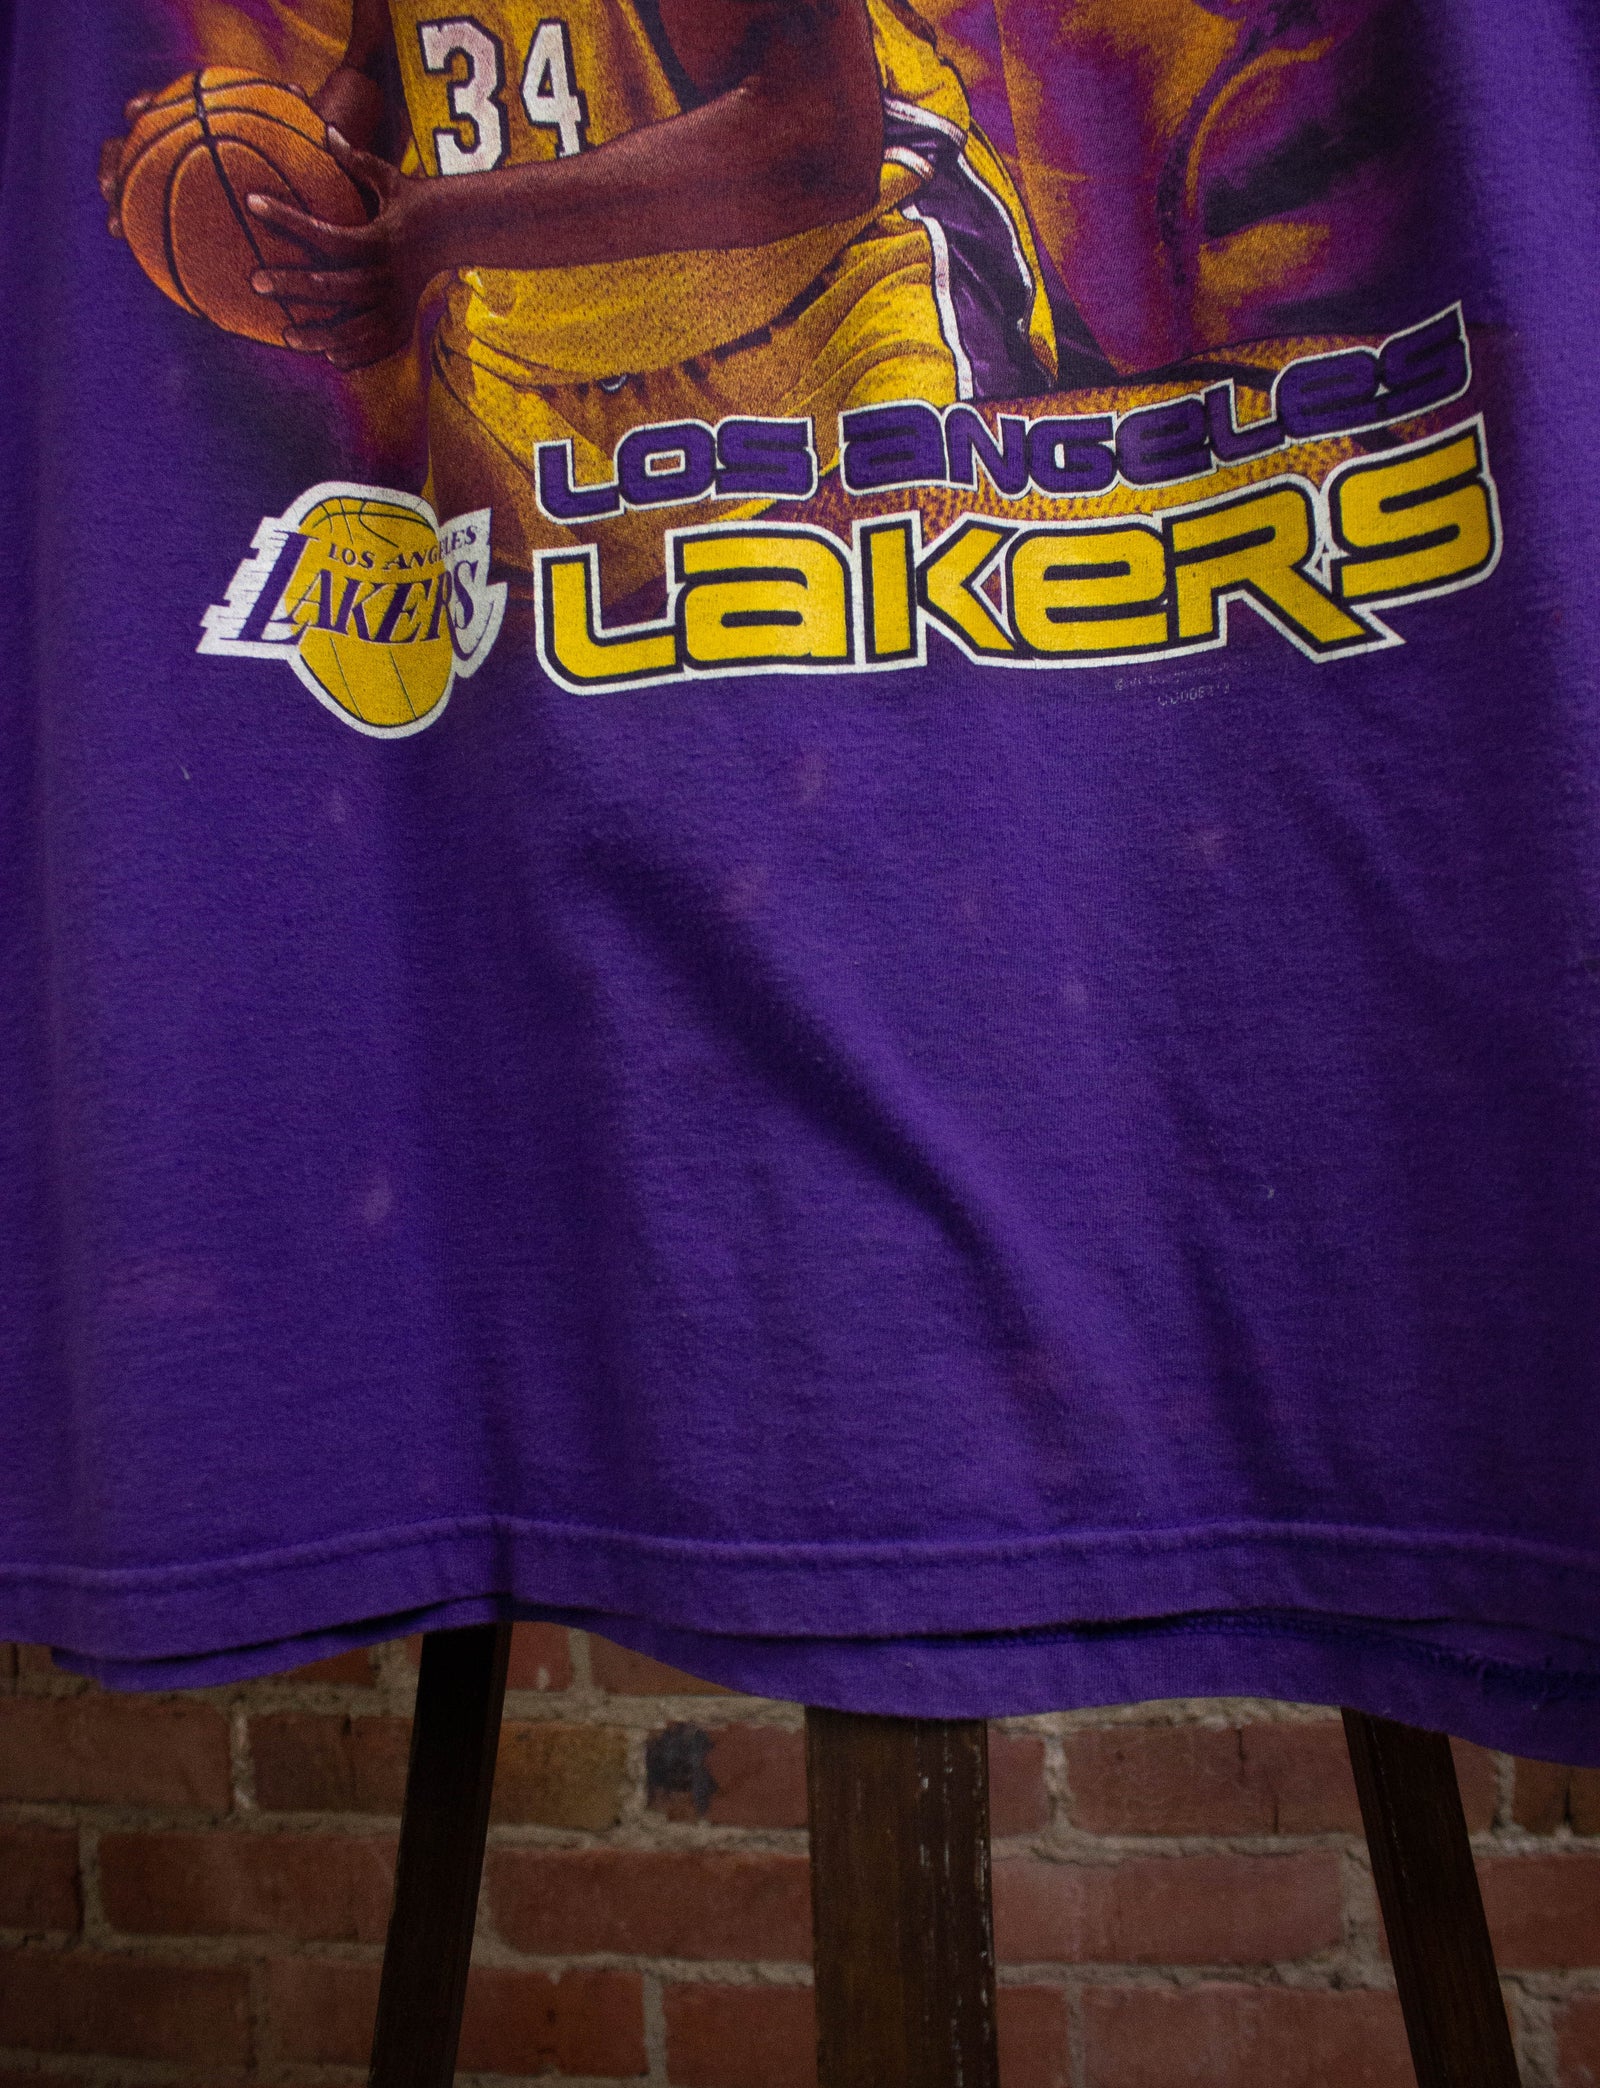 Vintage NBA Los Angeles Lakers Sweatshirt Size Large Made in USA 1990s